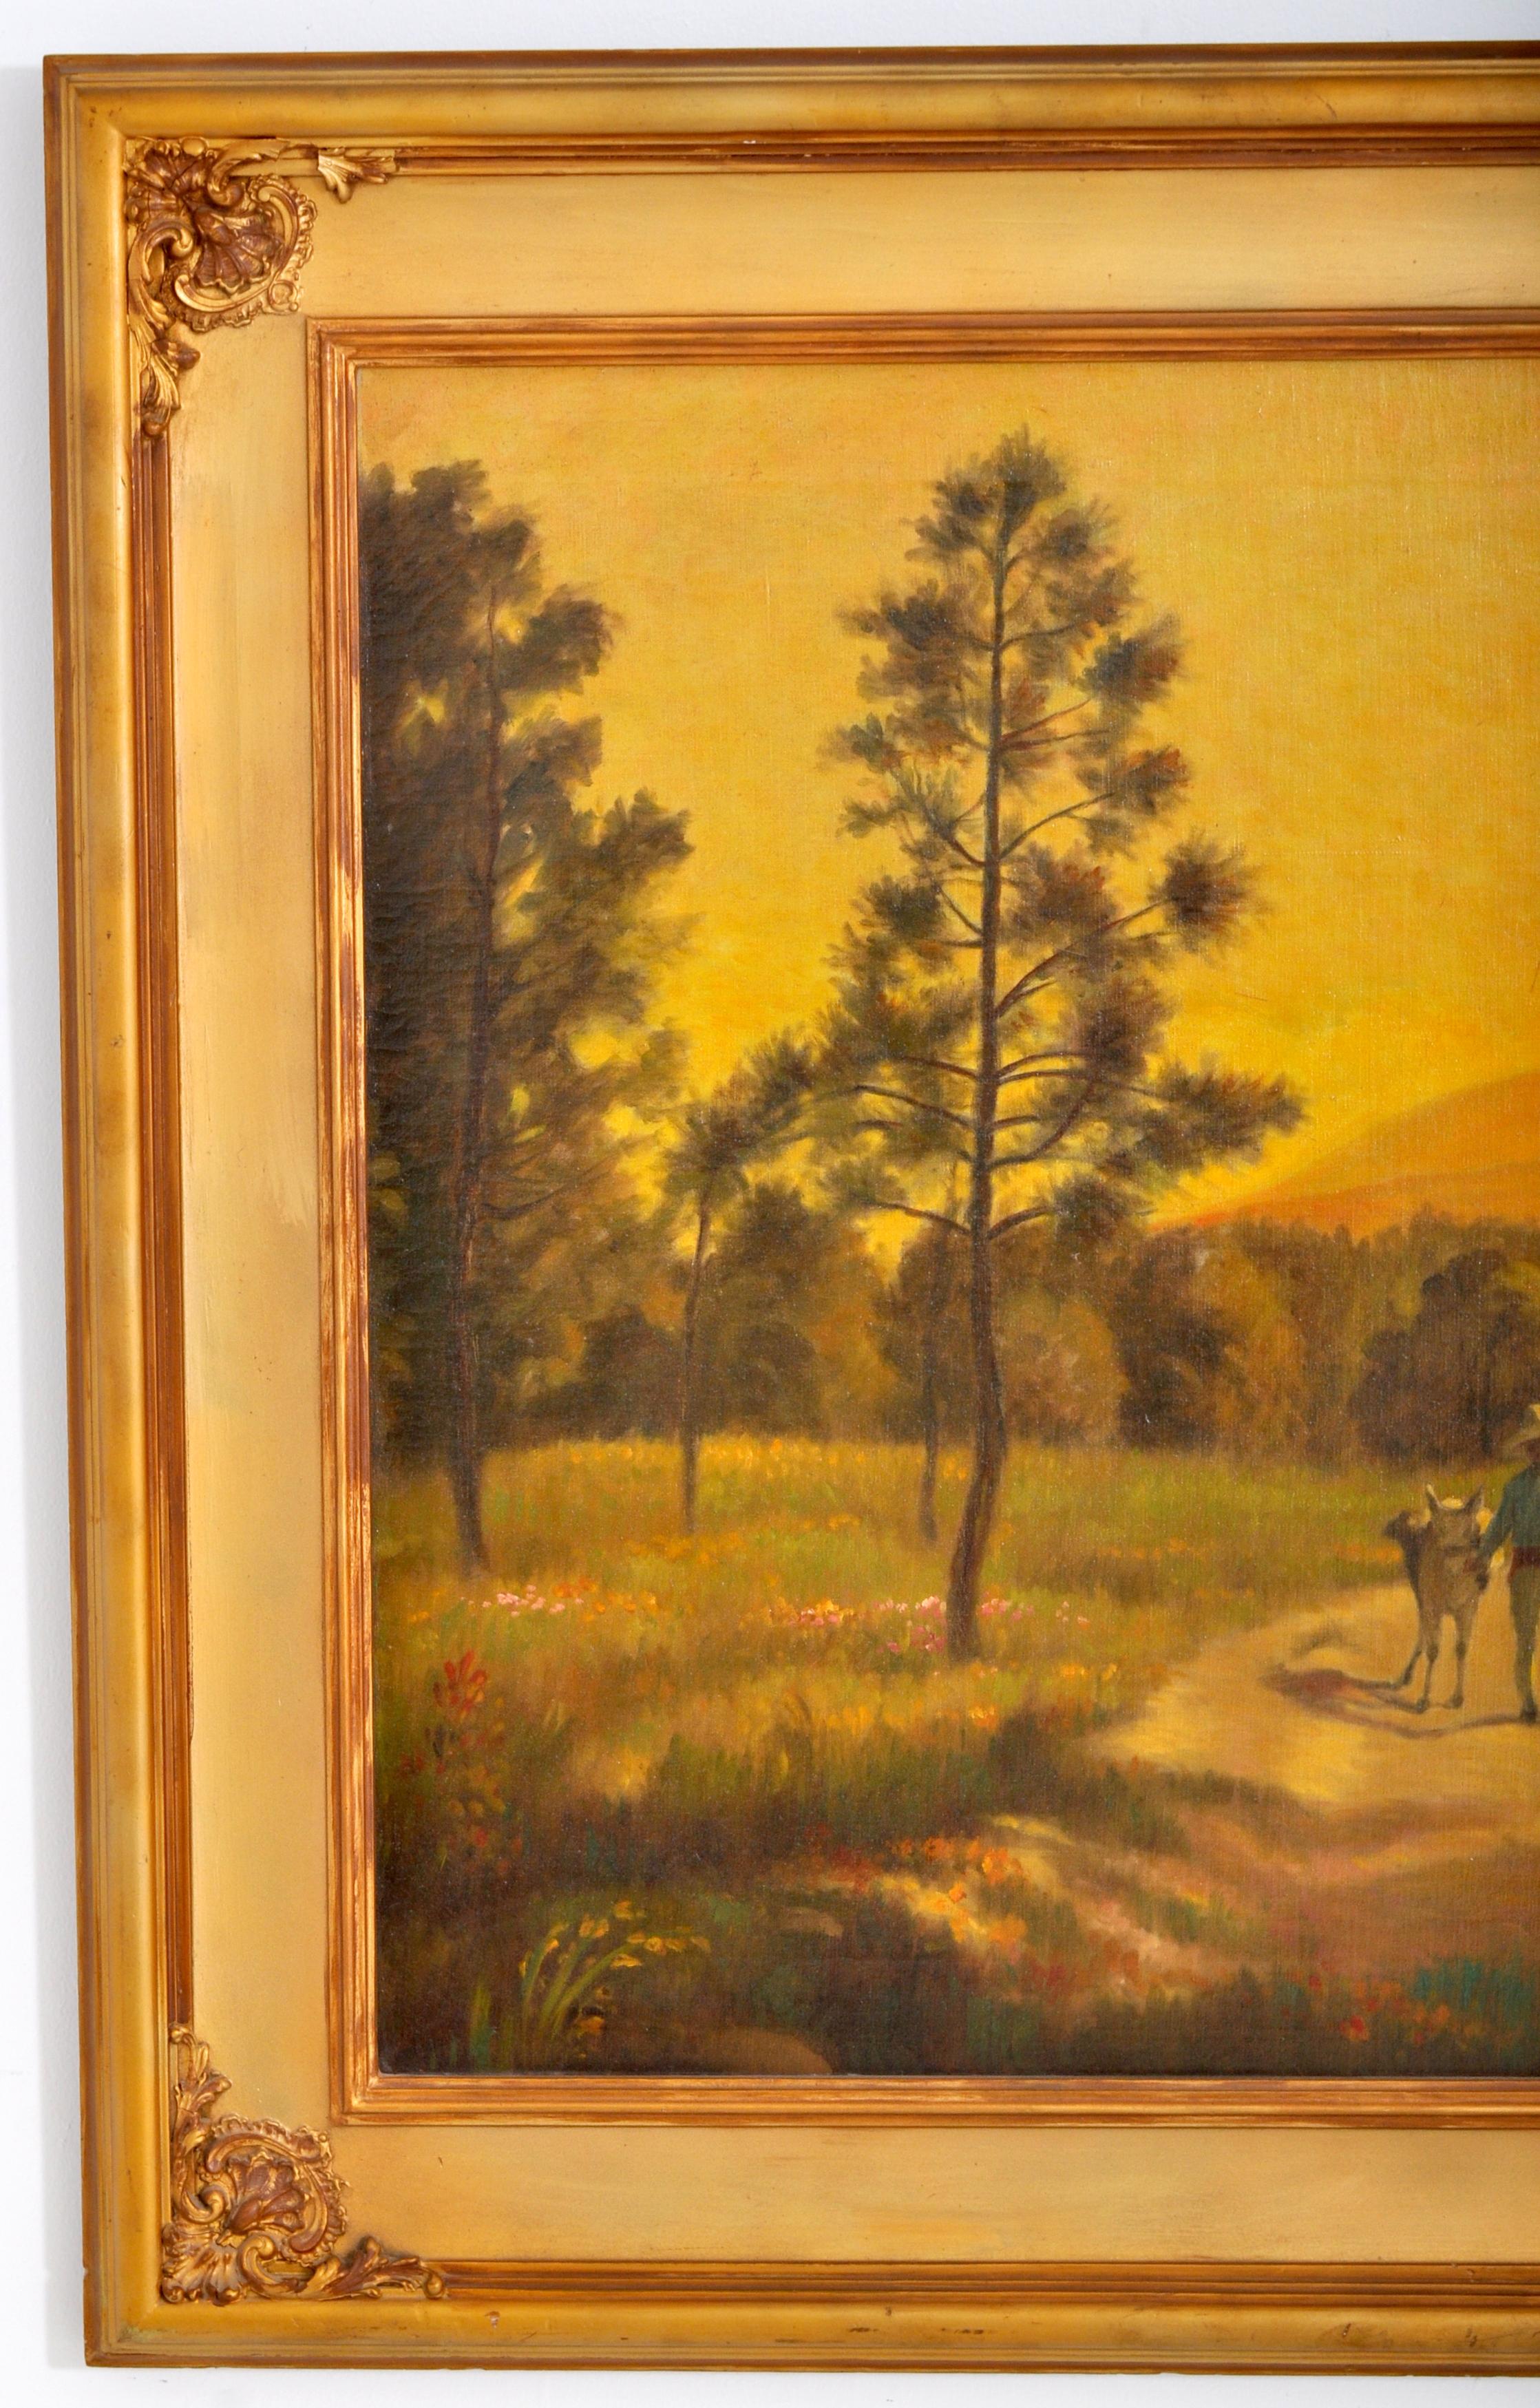 Antique American Oil on Canvas by Charles Holloway (American, 1859-1941), Circa 1915. The painting depicting a South American landscape scene, to the foreground a male figure walking a burro at sunset, the painting of substantial size and in very